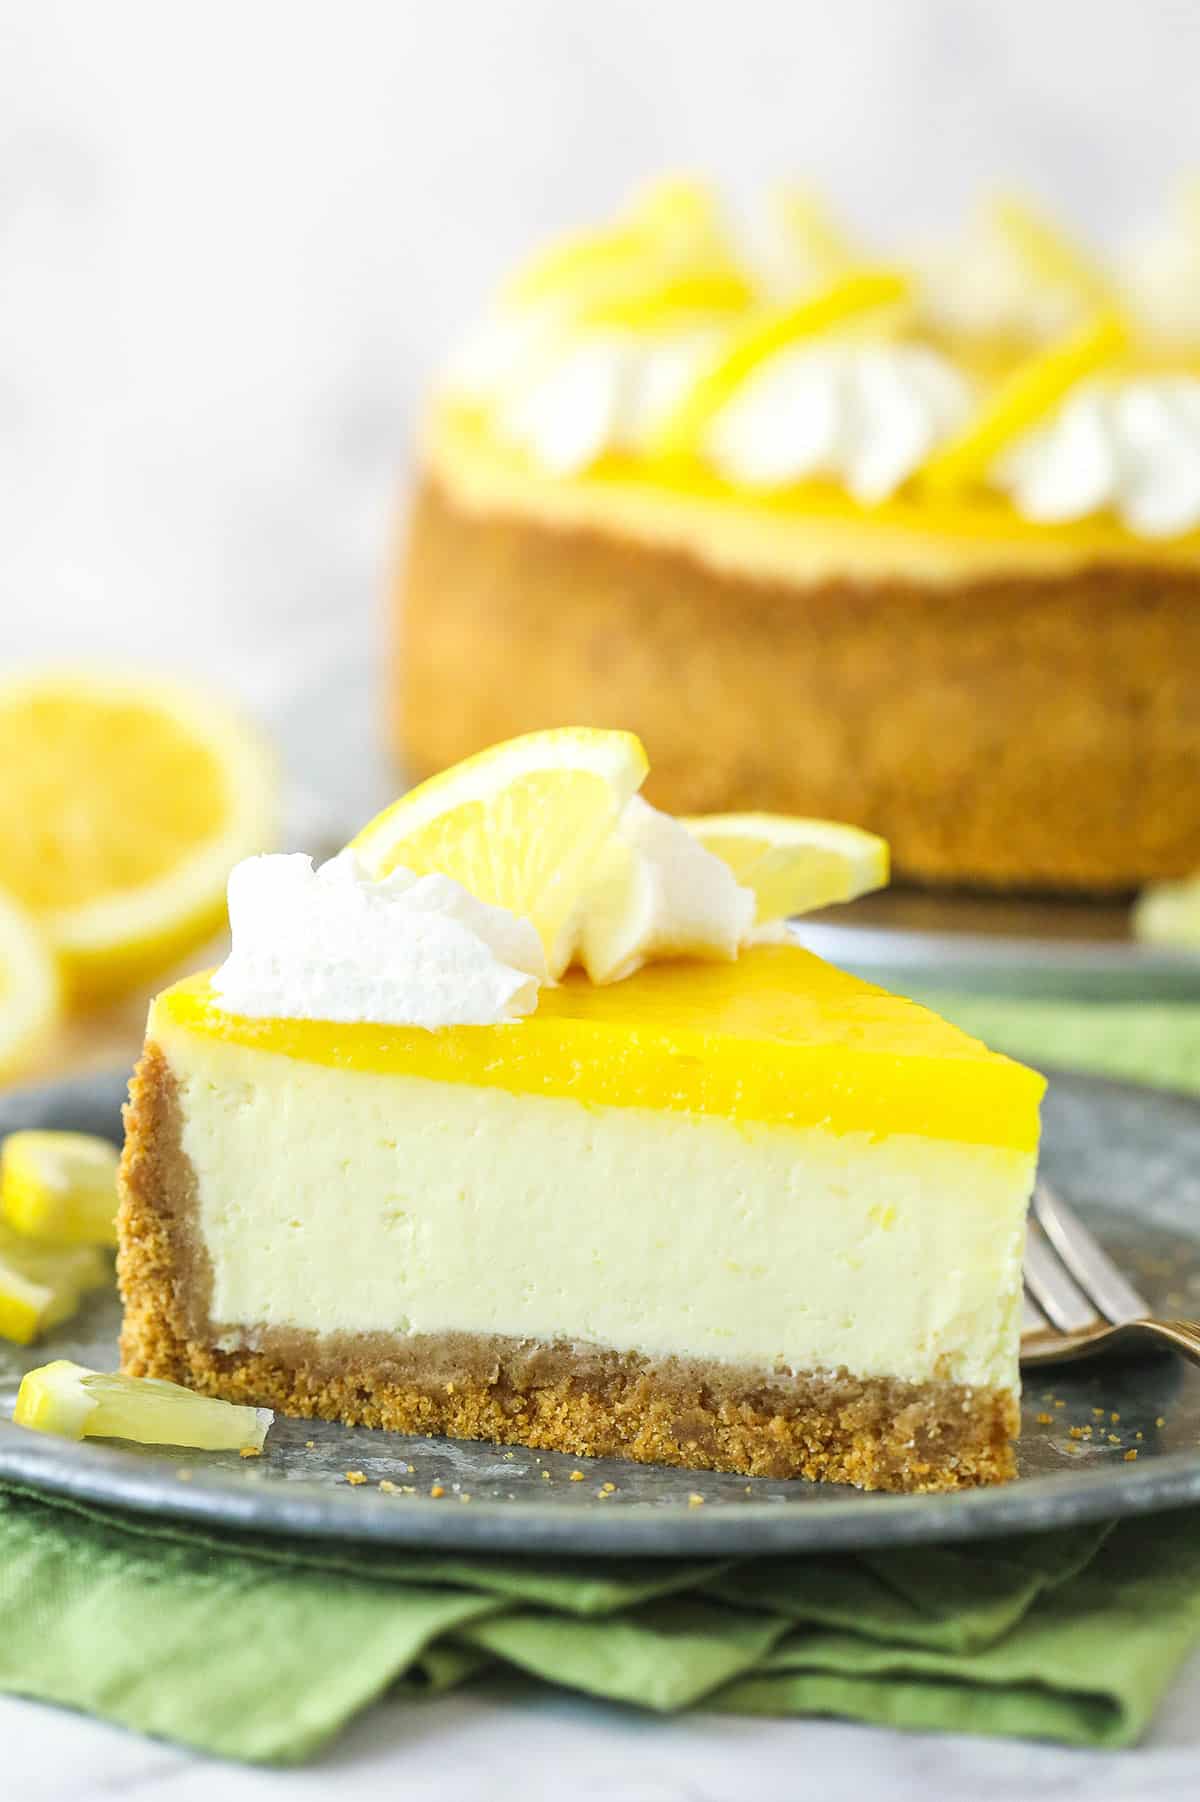 Lemon cheesecake served on a plate.